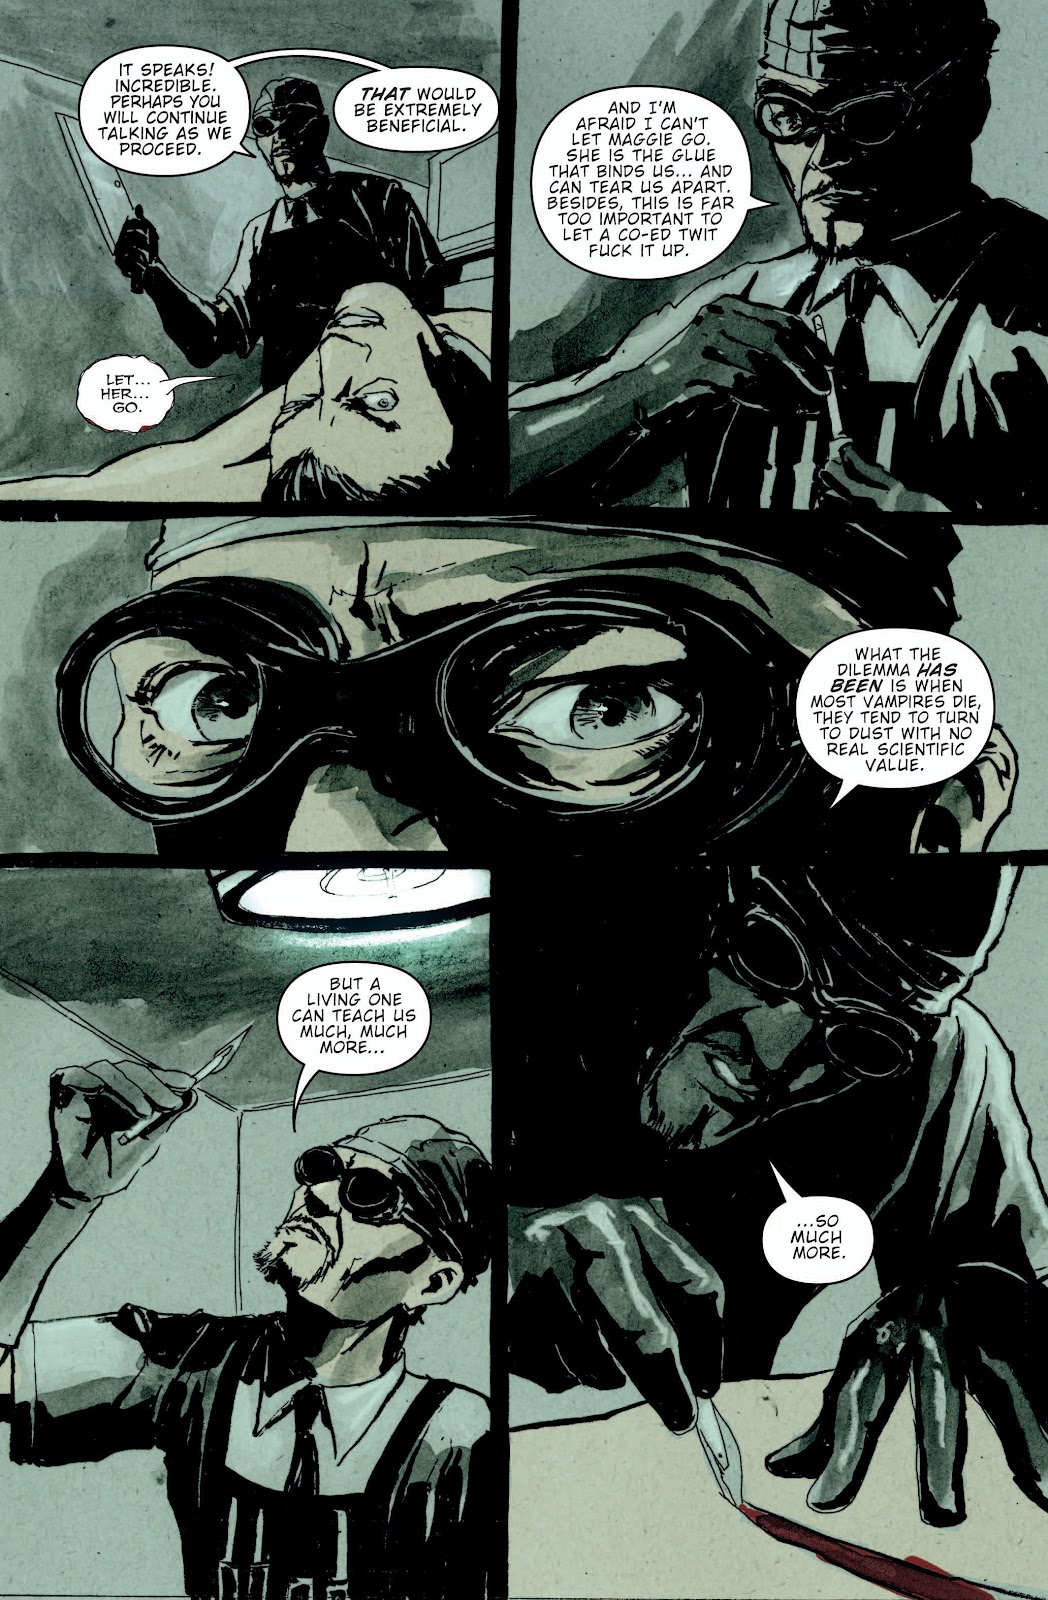 30 Days of Night: Bloodsucker Tales issue 6 - Page 10